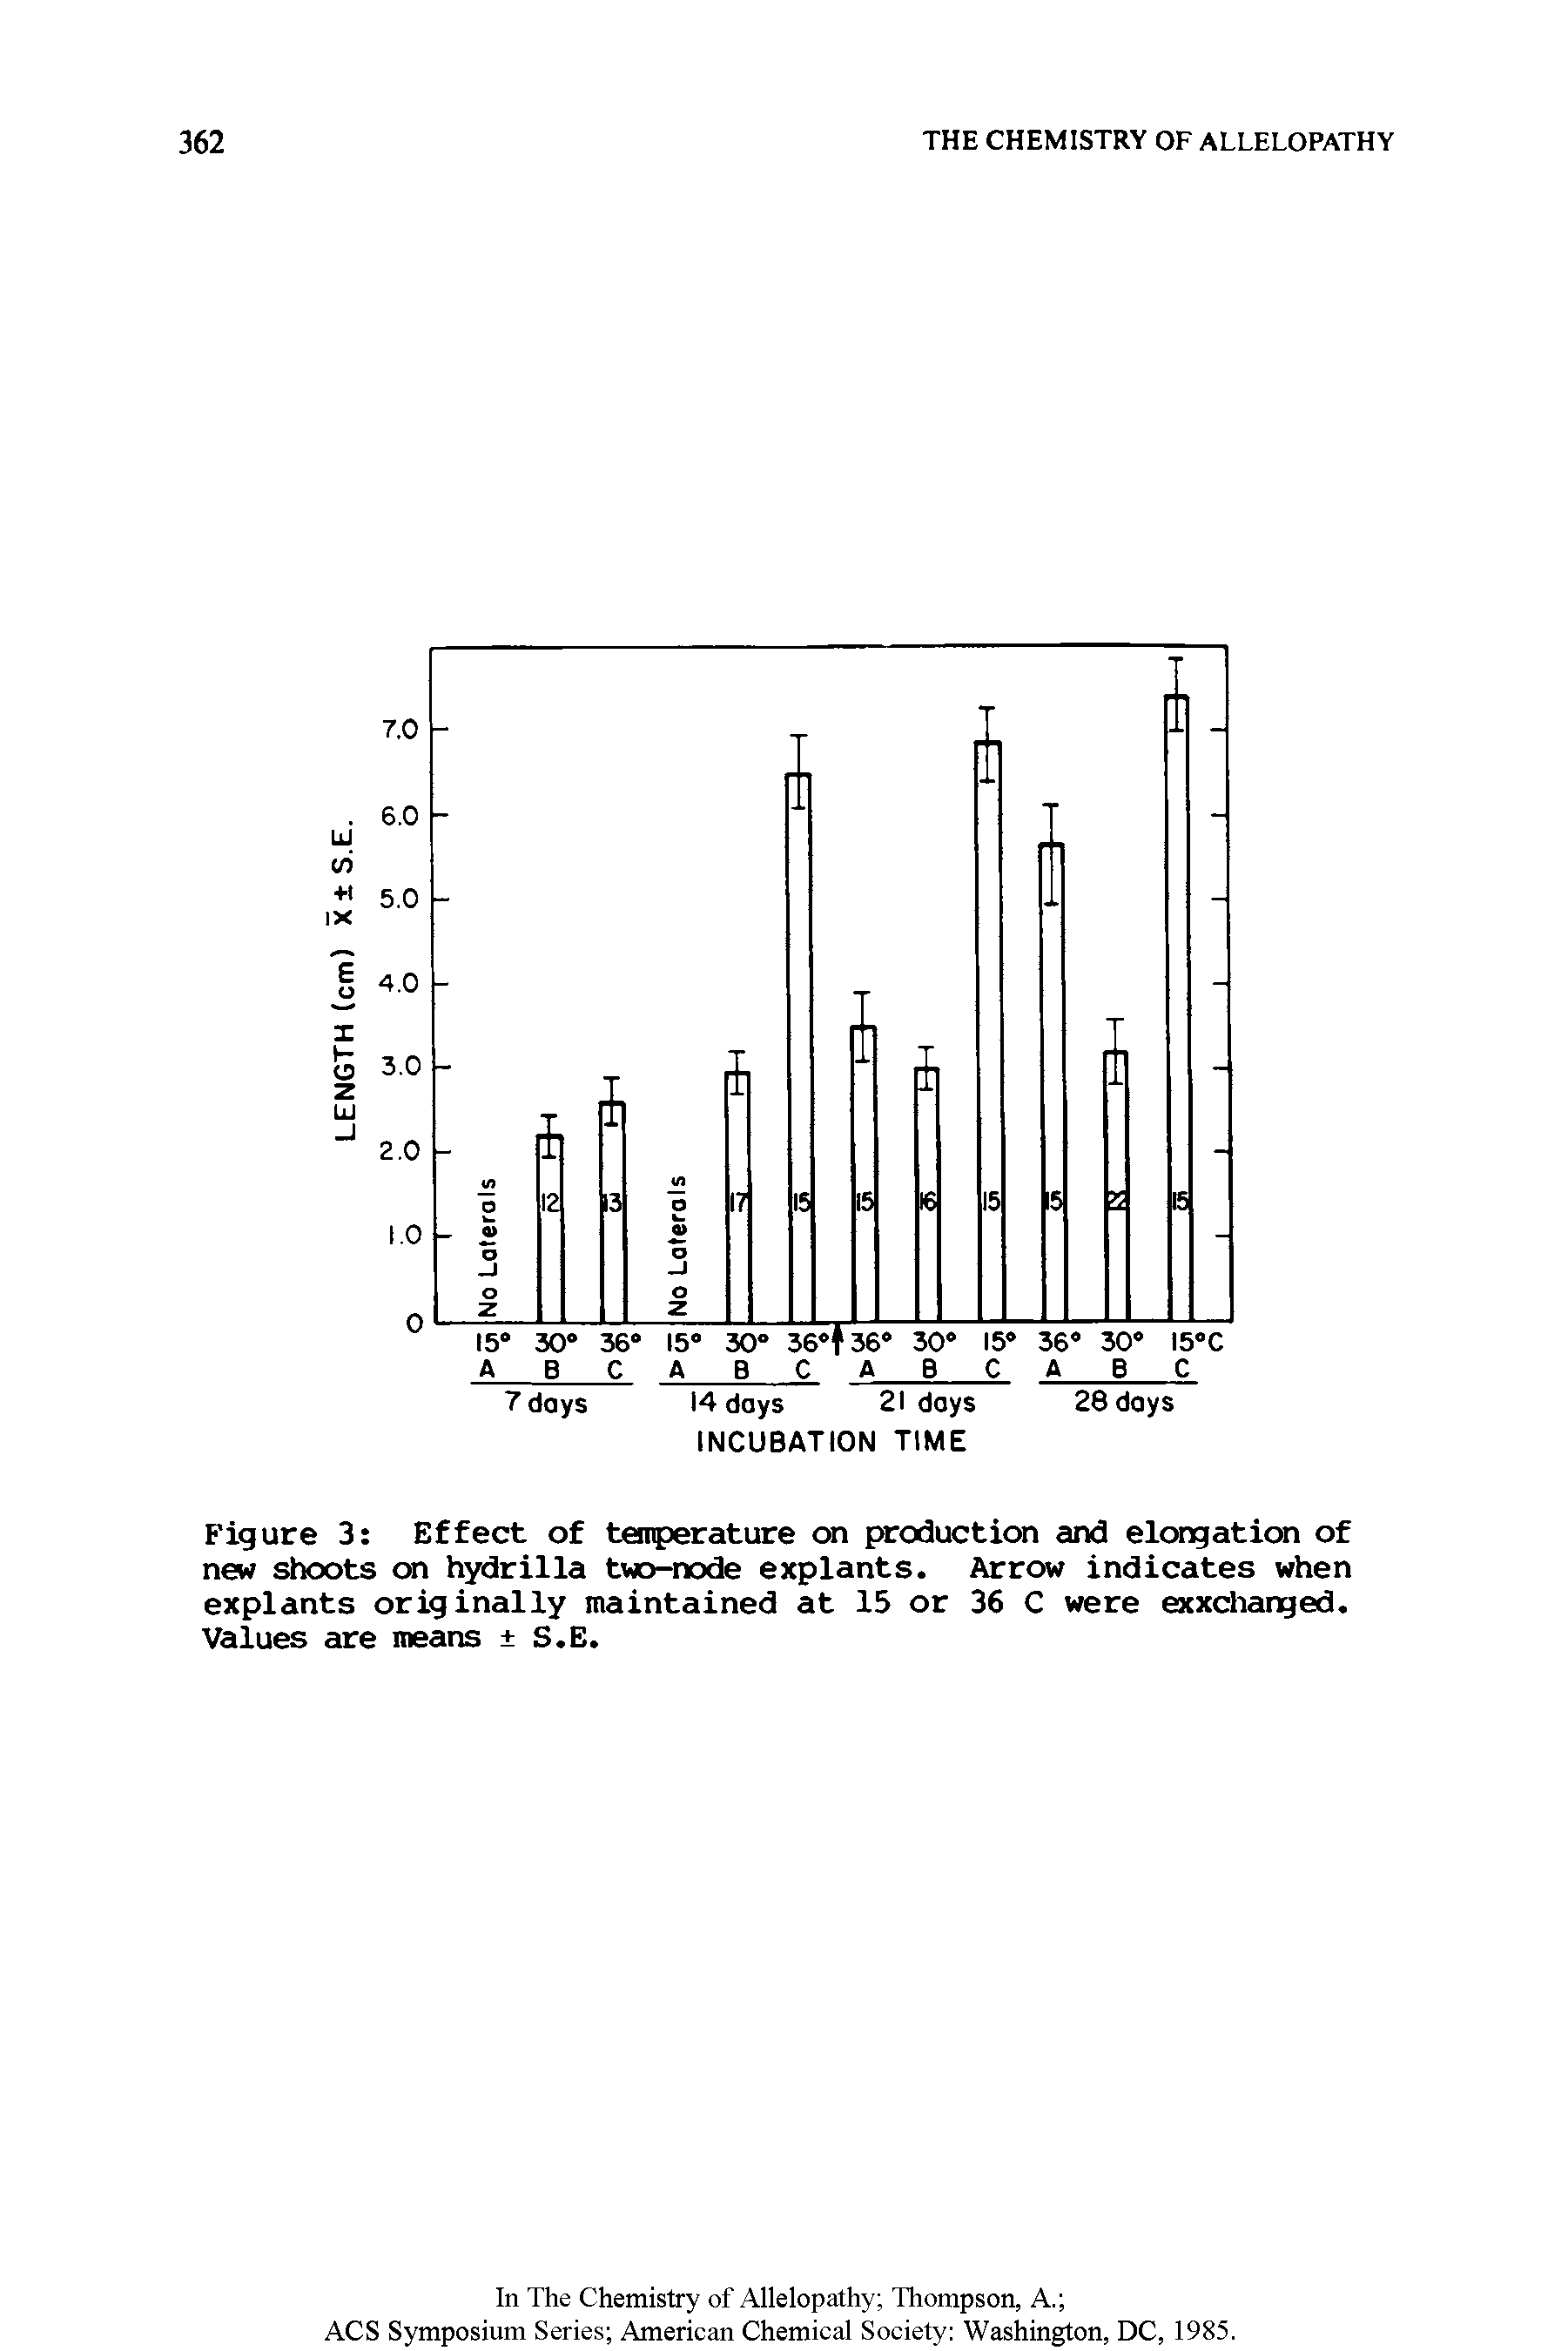 Figure 3 Effect of temperature on production and elongation of new shoots on hydrilla two-node explants. Arrow indicates when explants originally maintained at 15 or 36 C were exxcharxjed. Values are means S.E.